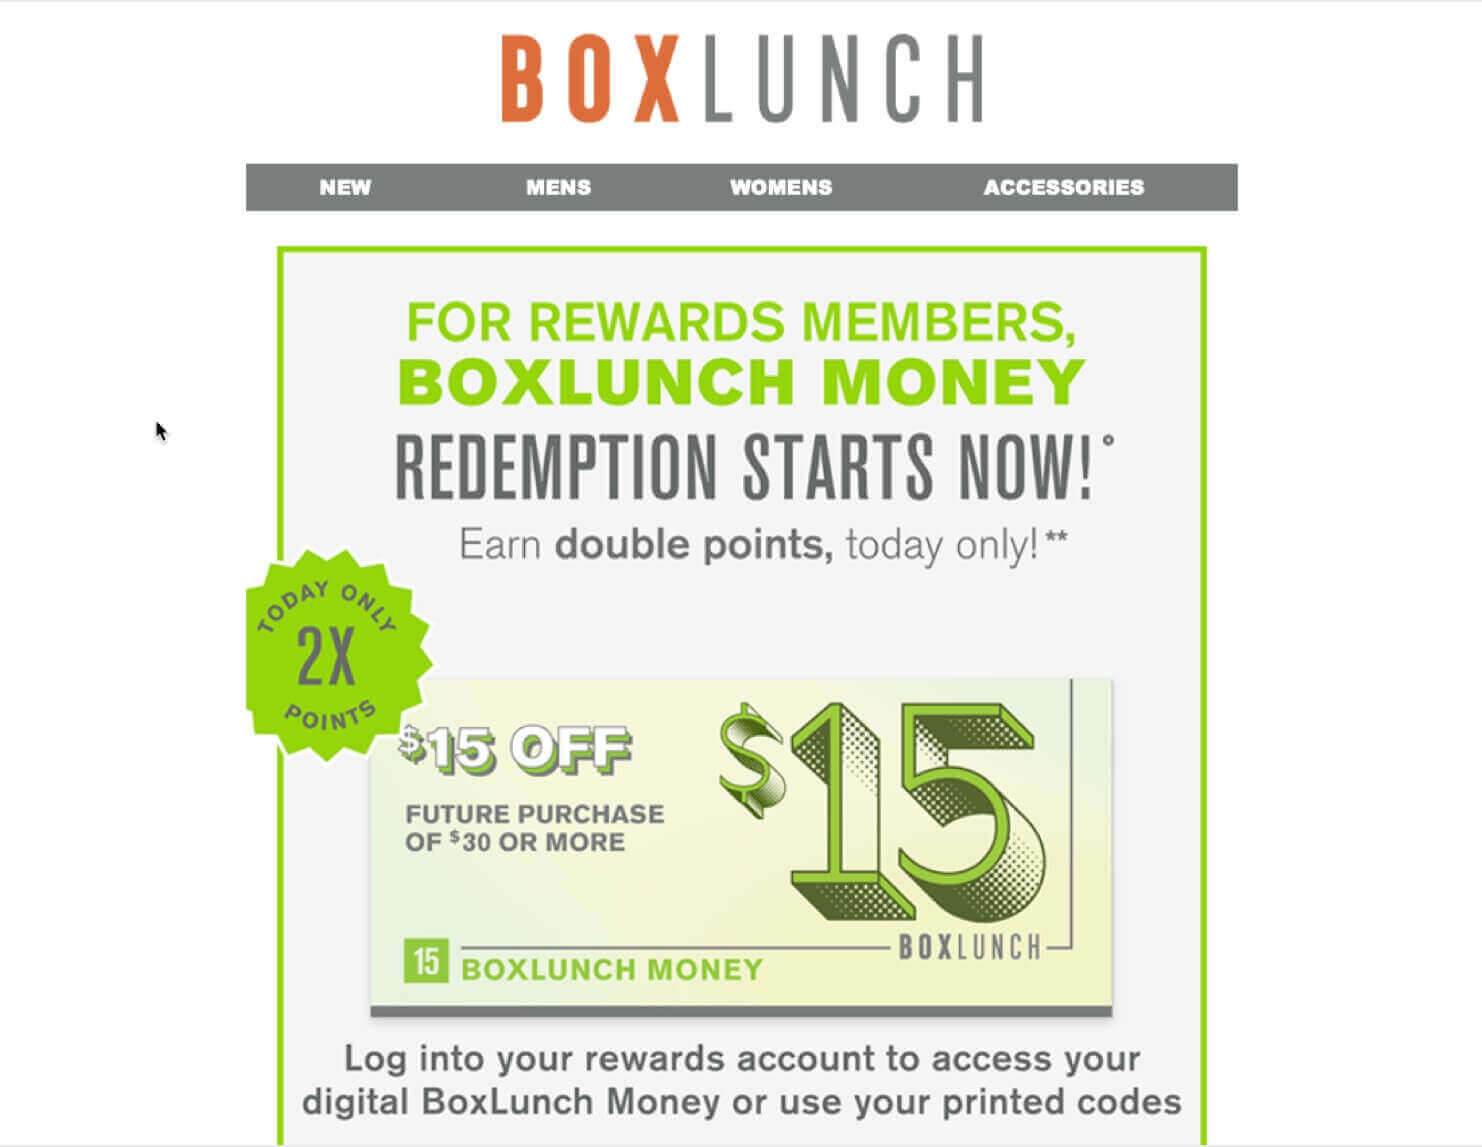 BoxLunch eCommerce email example. It says "FOR REWARDS MEMBERS, BOXLUNCH MONEY REDEMPTION STARTS NOW!' Earn double points, today only!**" It shows that the subscriber has $15 in BoxLunch Money that they can use on a future purchase. Then it says, "Log into your rewards account to access your digital BoxLunch Money or use your printed codes"